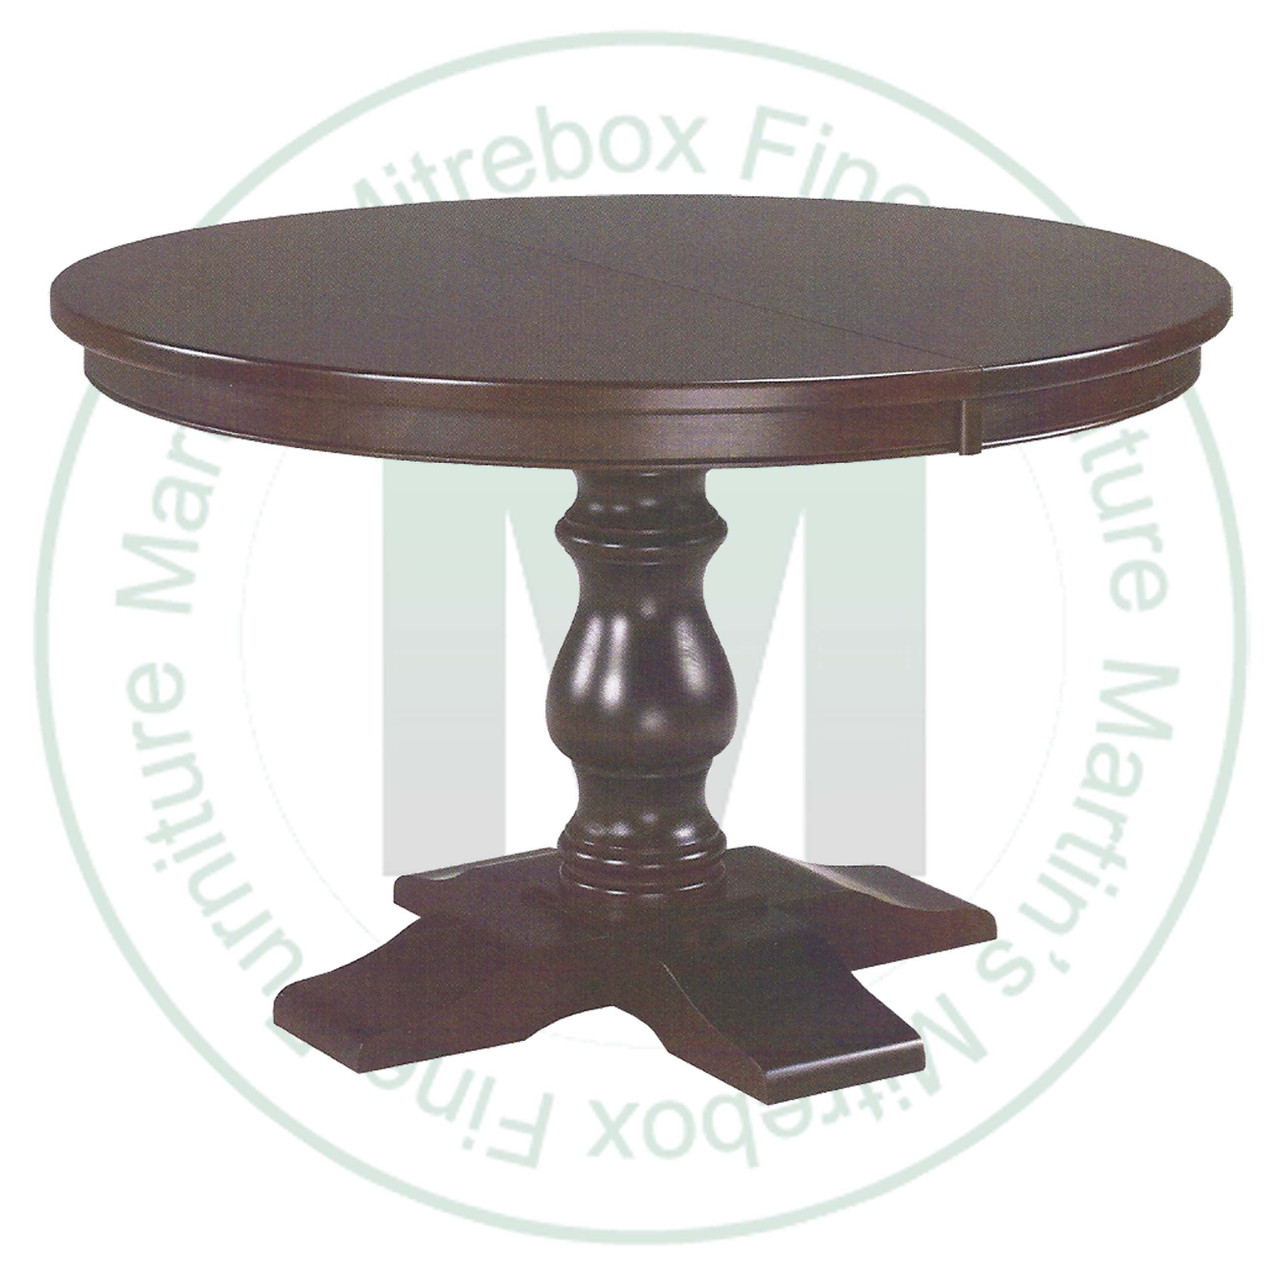 Wormy Maple Savannah Single Pedestal Table 48''D x 48''W x 30''H Round Solid Table. Table Has 1'' Thick Top.